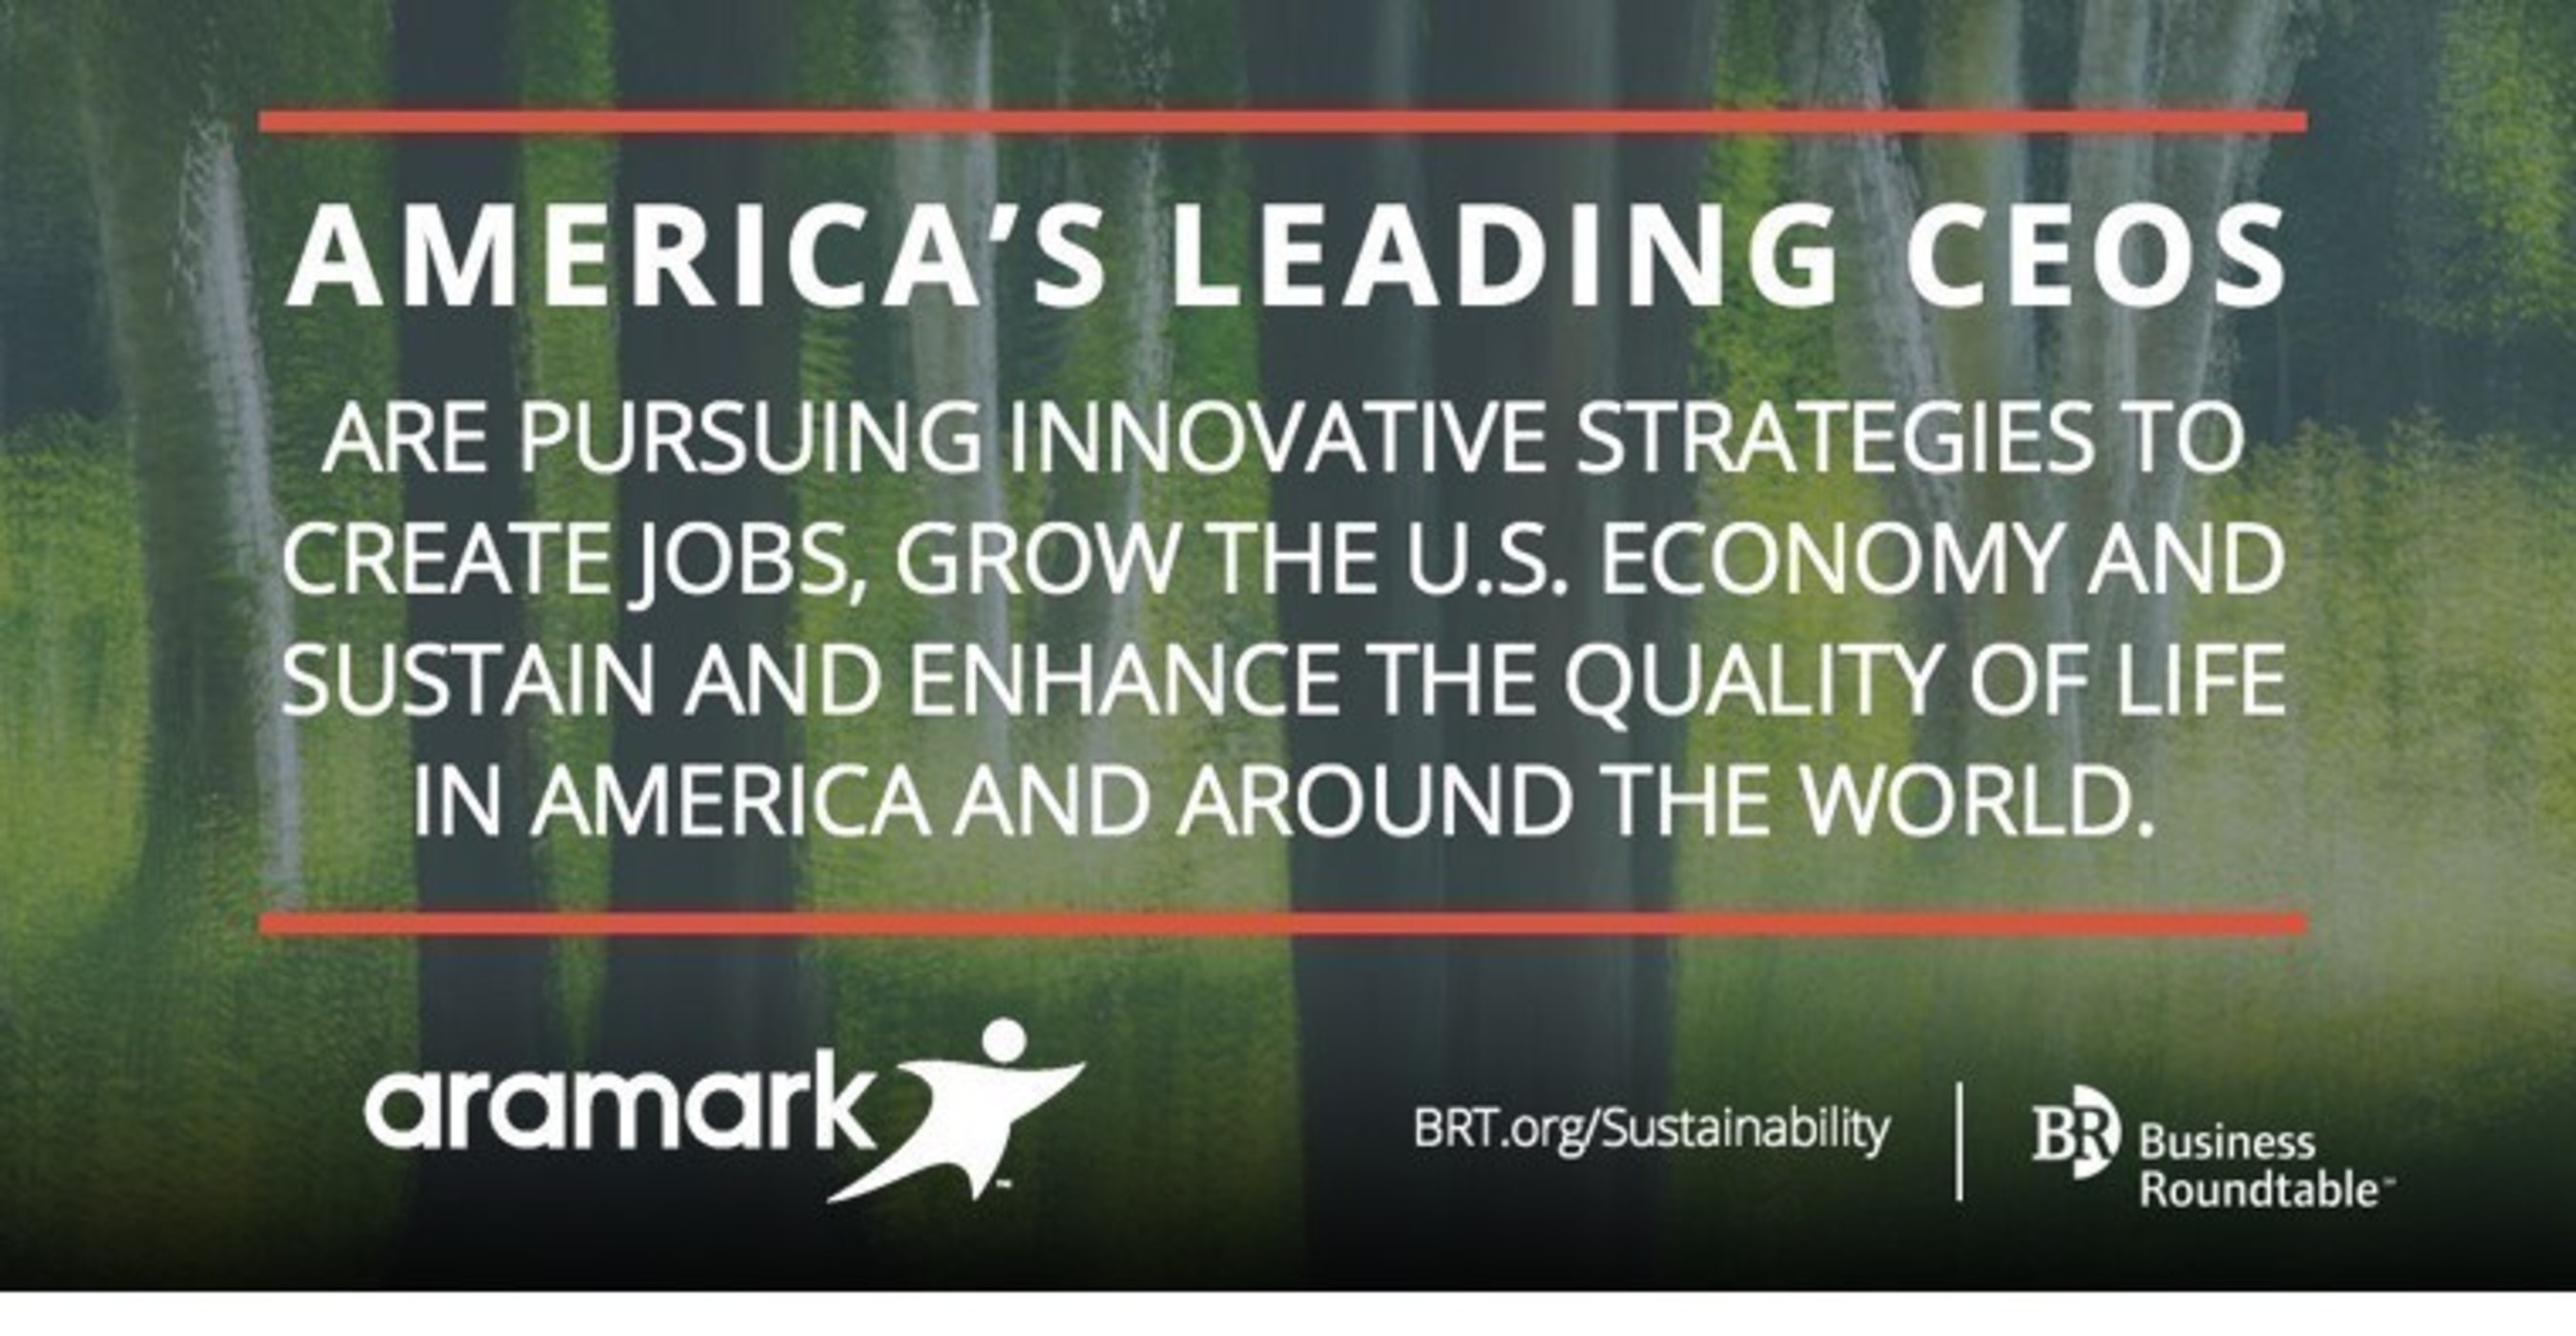 Aramark is recognized for its commitment to healthy lifestyles by the Business Roundtable